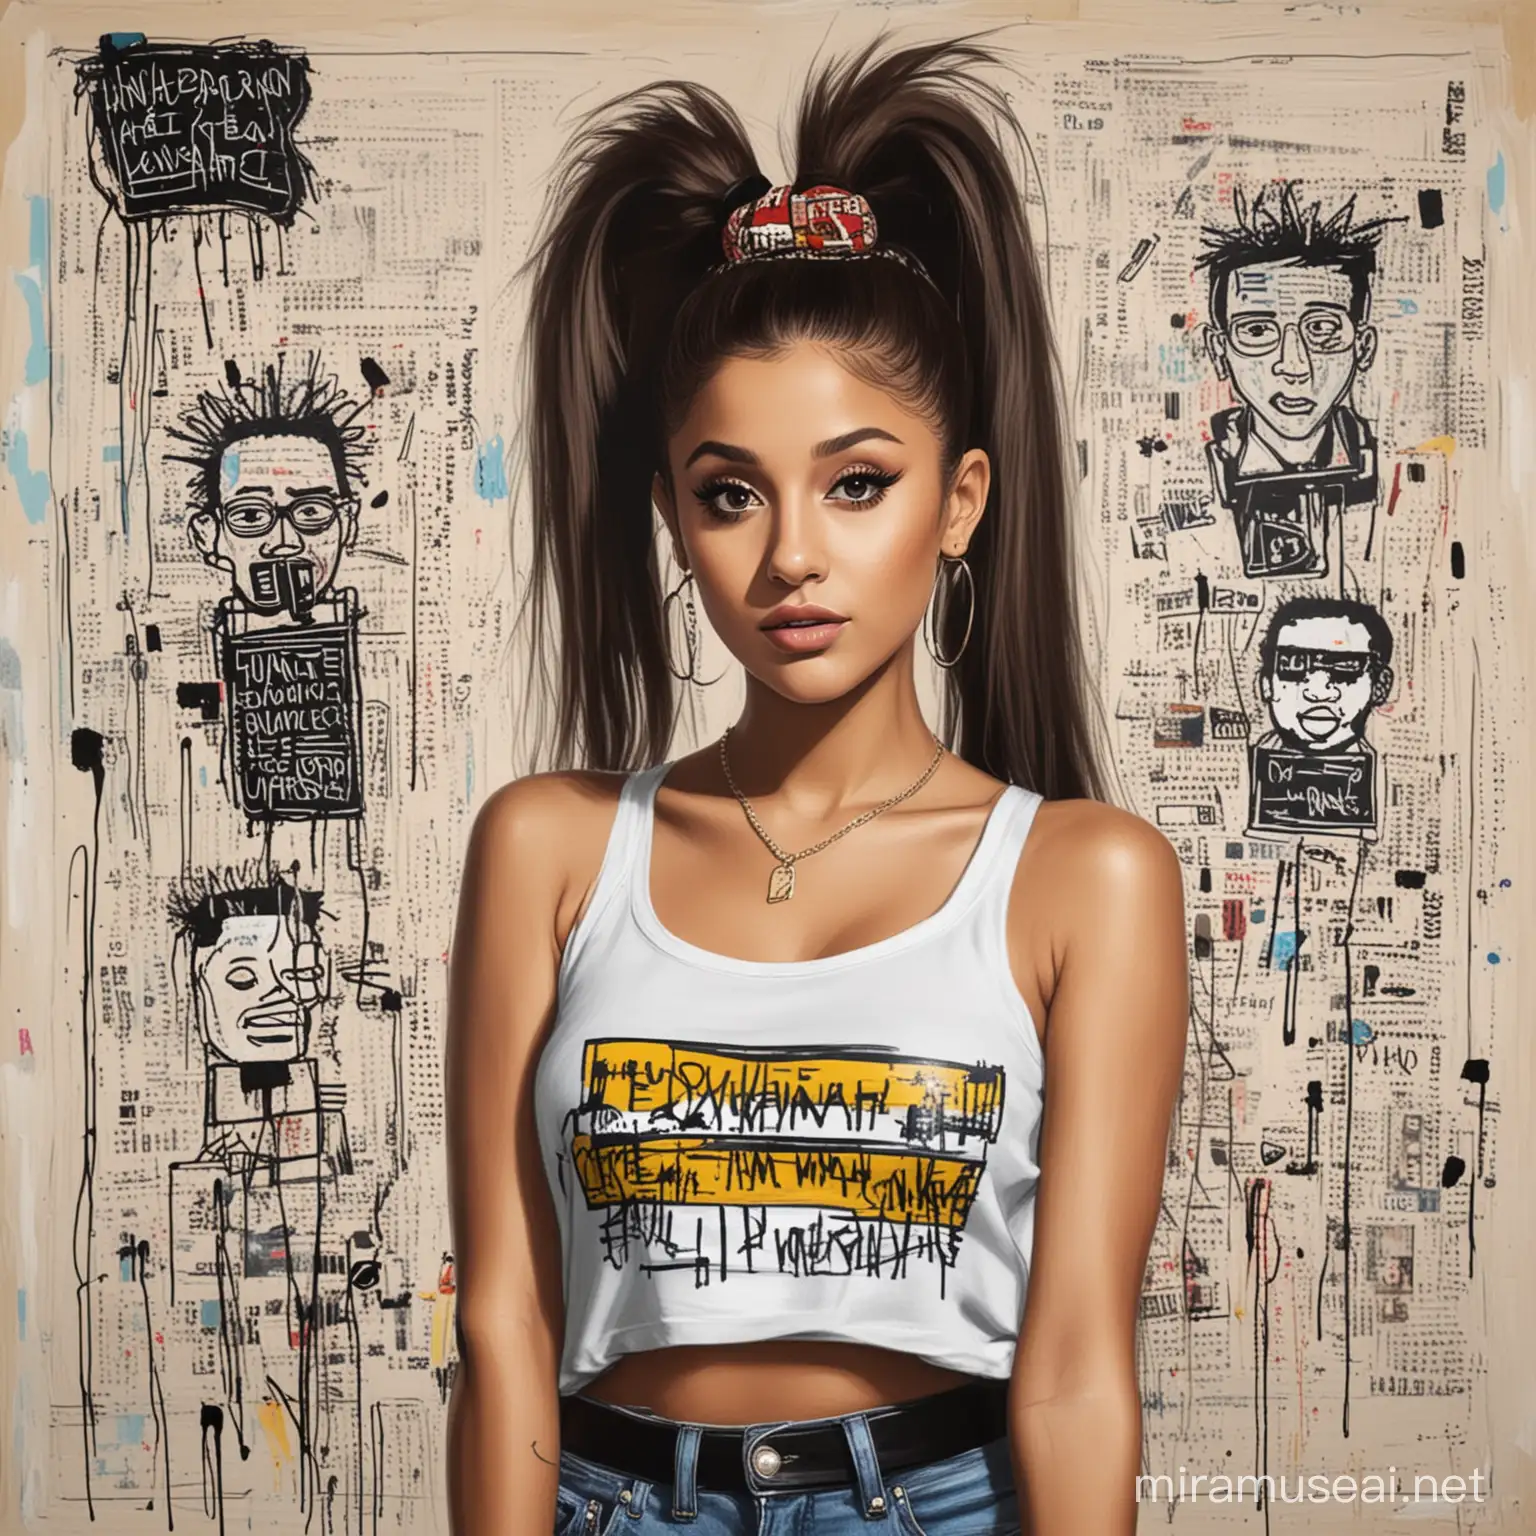 Ariana Grande Portrait Inspired by Basquiats Iconic Style